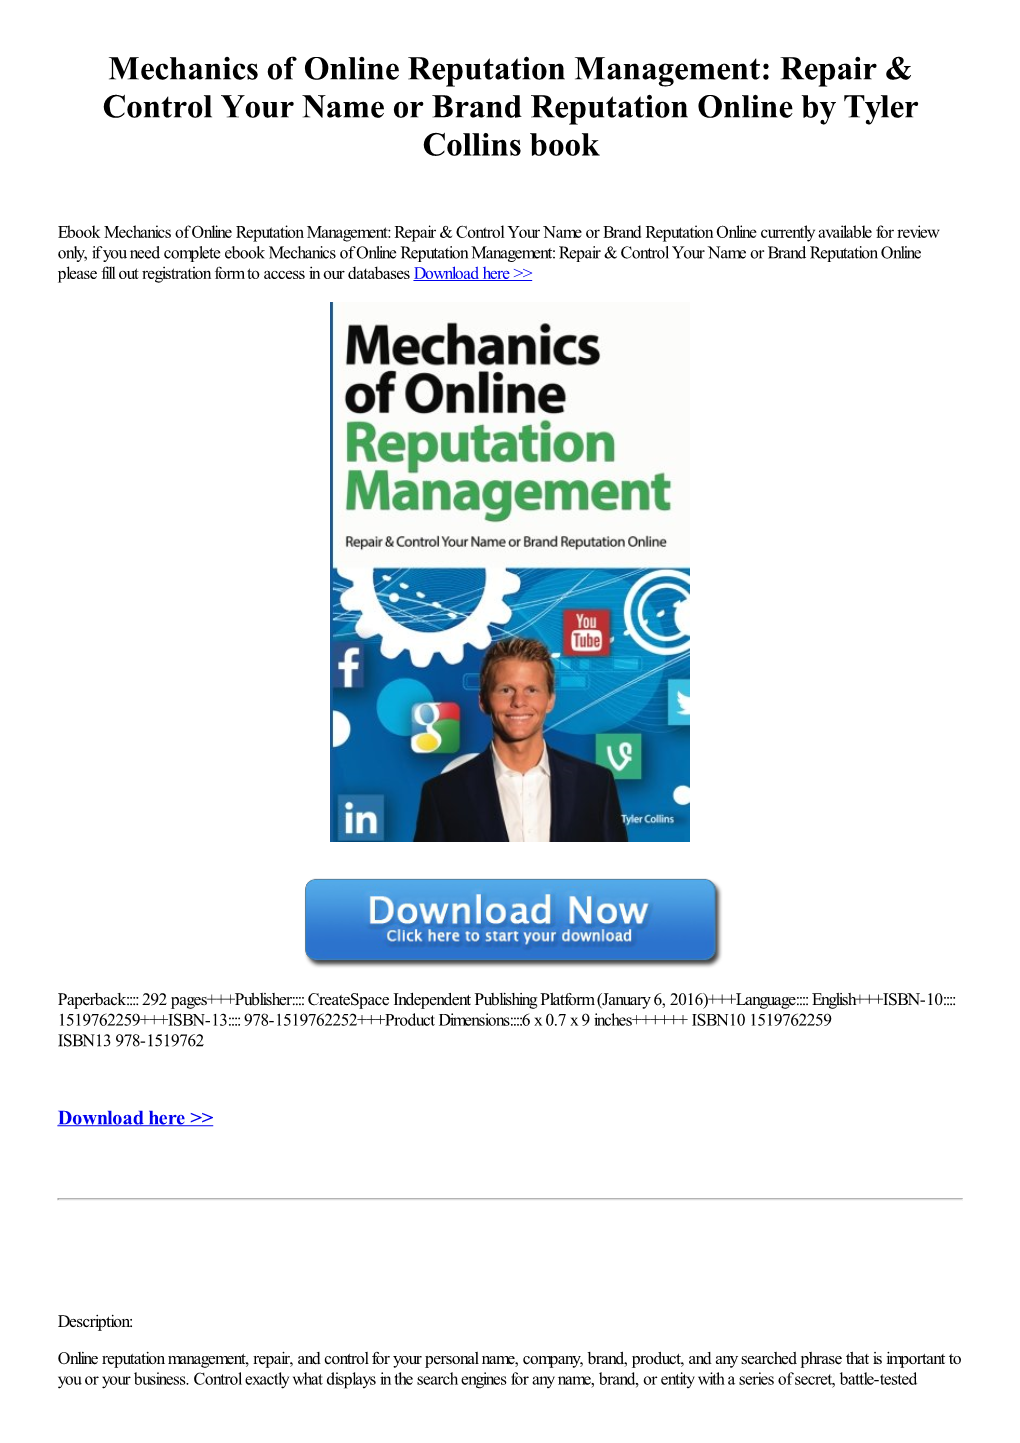 Mechanics of Online Reputation Management: Repair & Control Your Name Or Brand Reputation Online by Tyler Collins